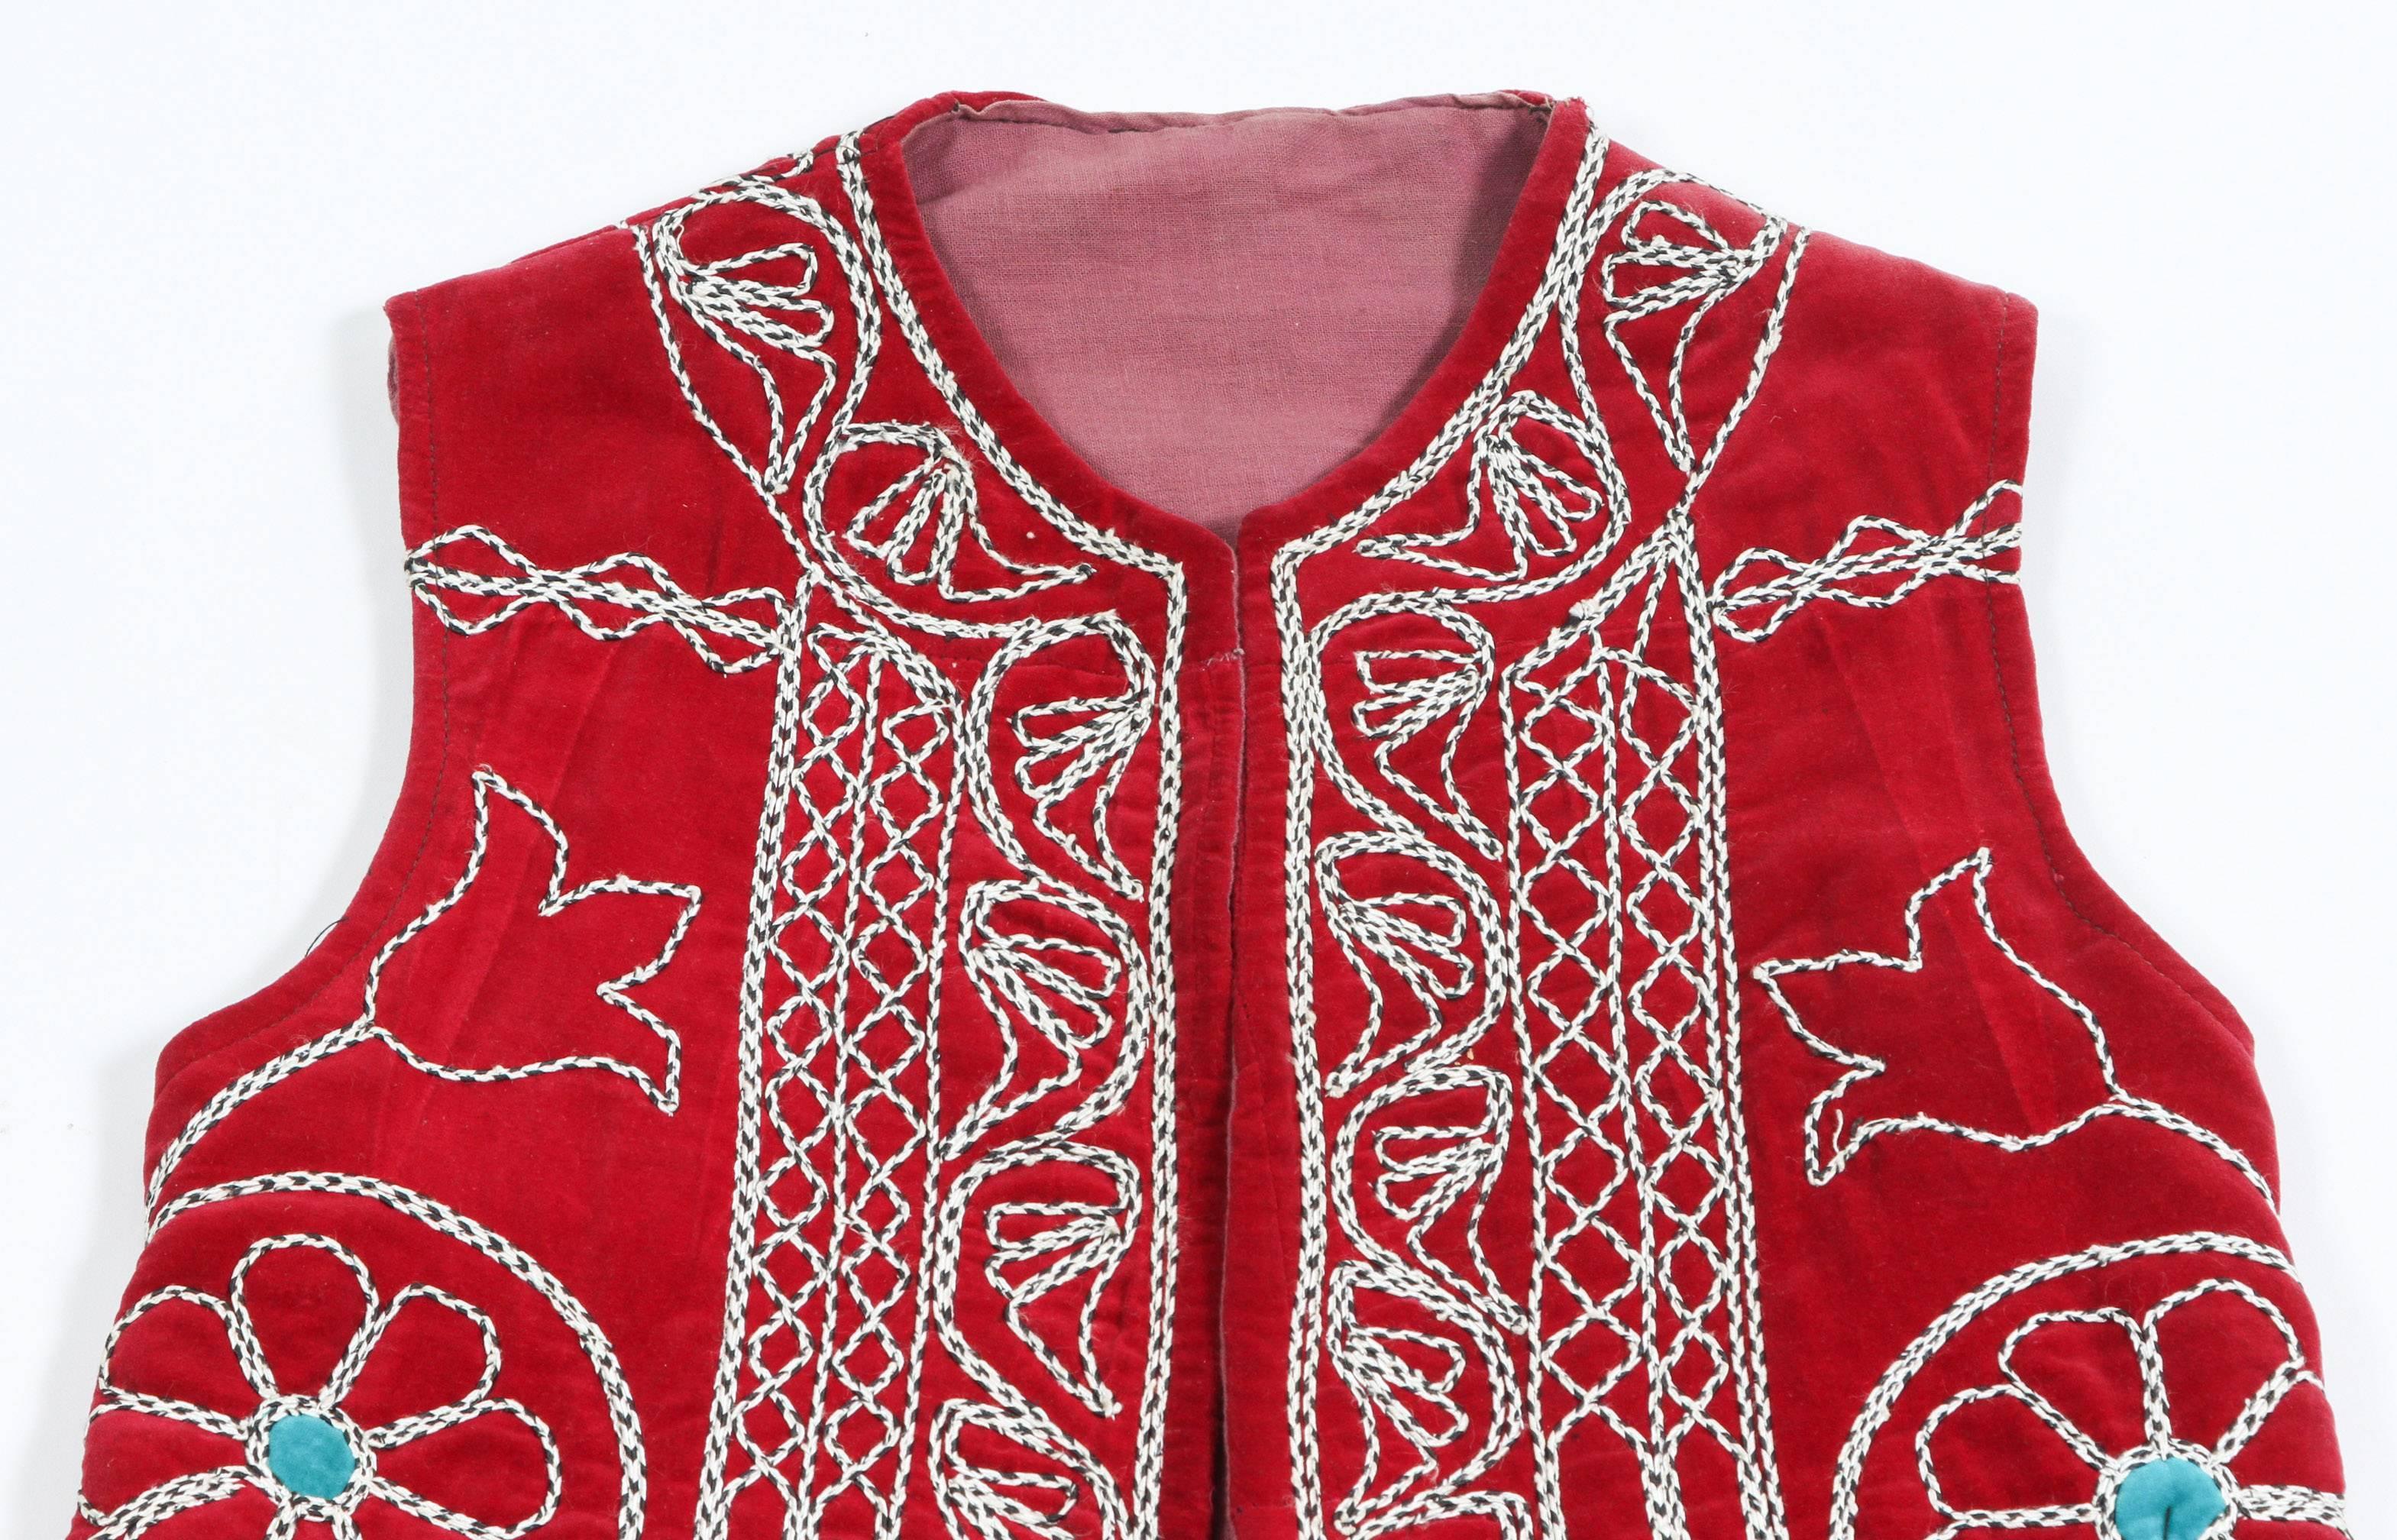 Elegant vintage Turkish long vest brightly colored design of geometric patterns against a red ground.
Part of Turkish folk ceremonial traditional costume.
The designs on the open jacket are embroidered with white threads, flowers and elaborate